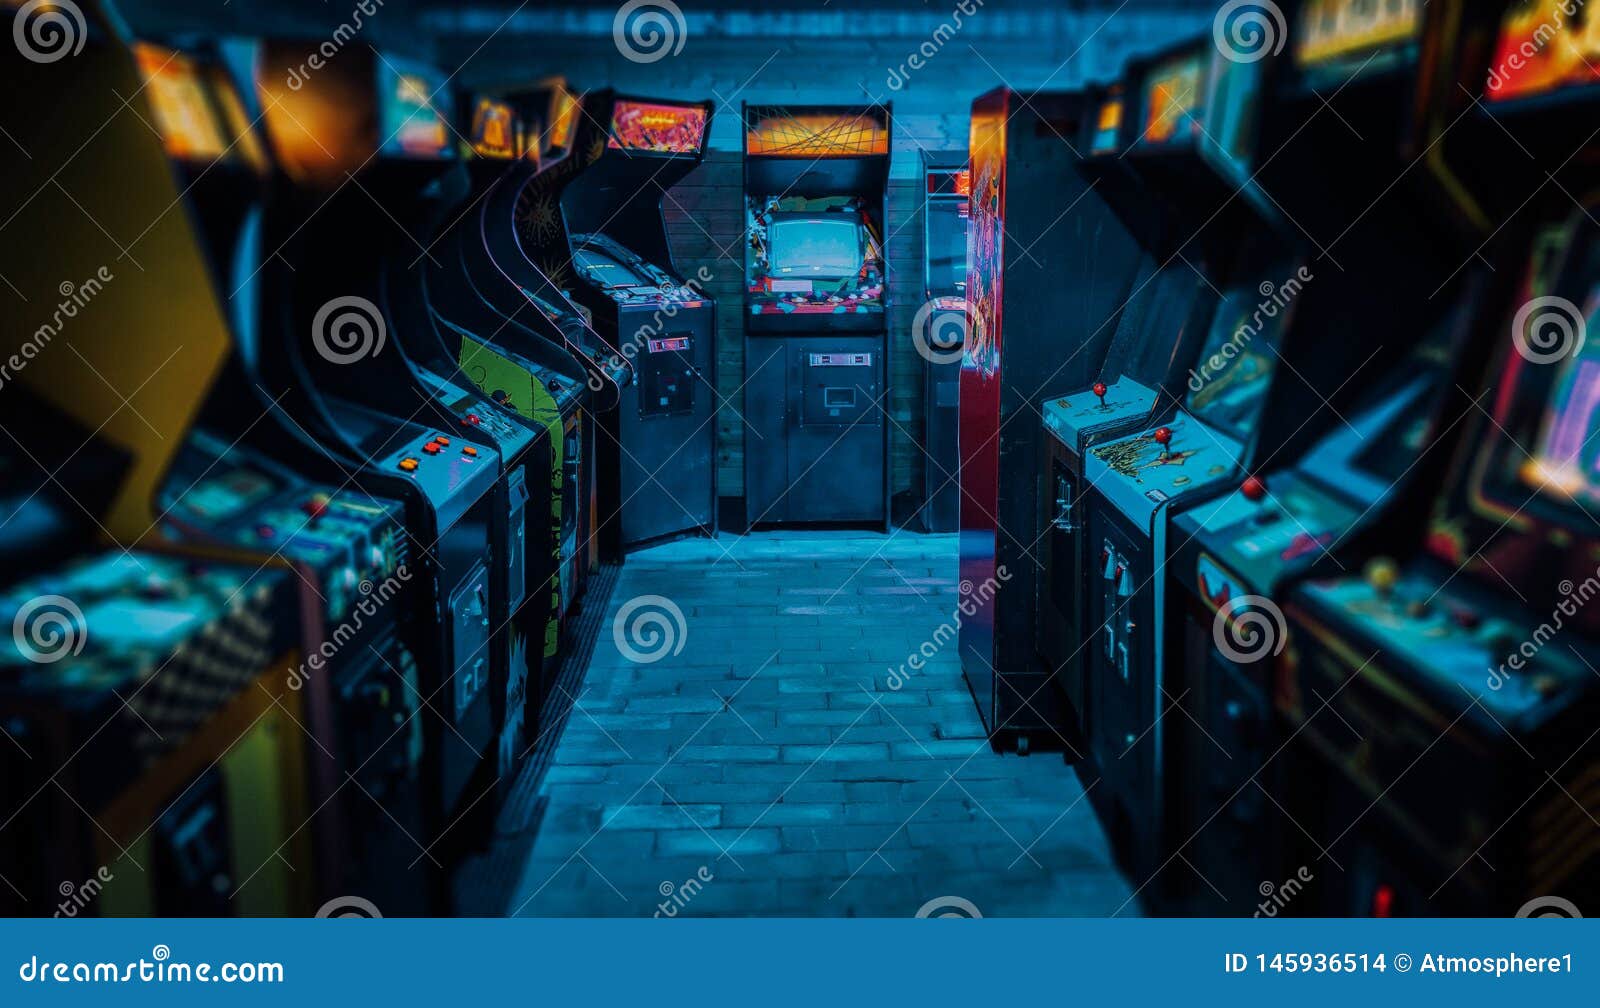 old vintage arcade video games in an empty dark gaming room with blue light with glowing displays and beautiful retro 